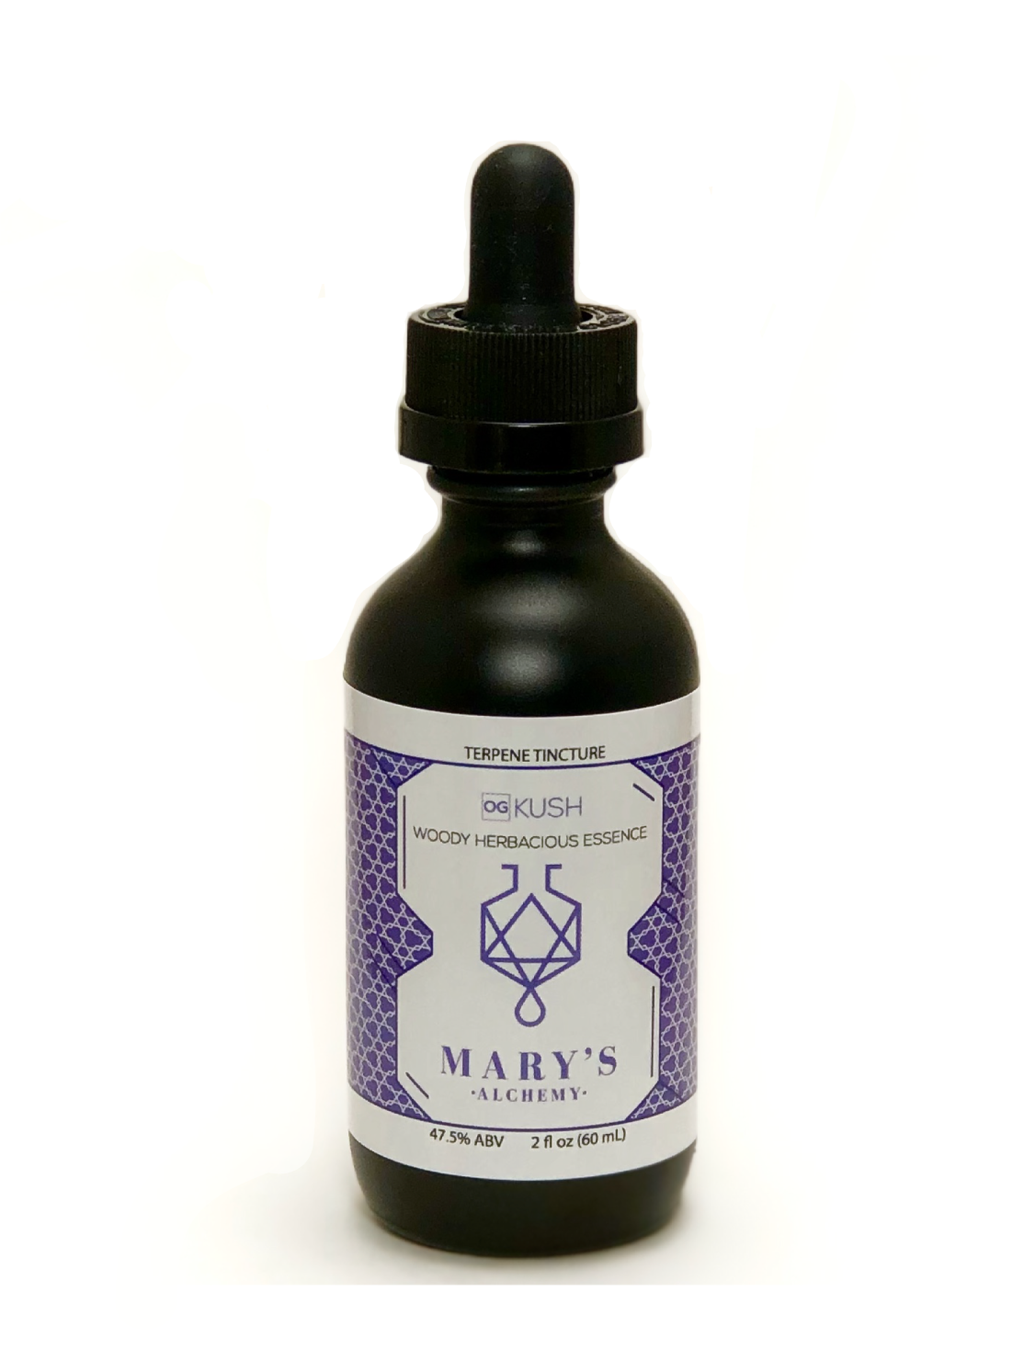 OG Kush | Cannabis-Flavored Bitters by Mary's Alchemy